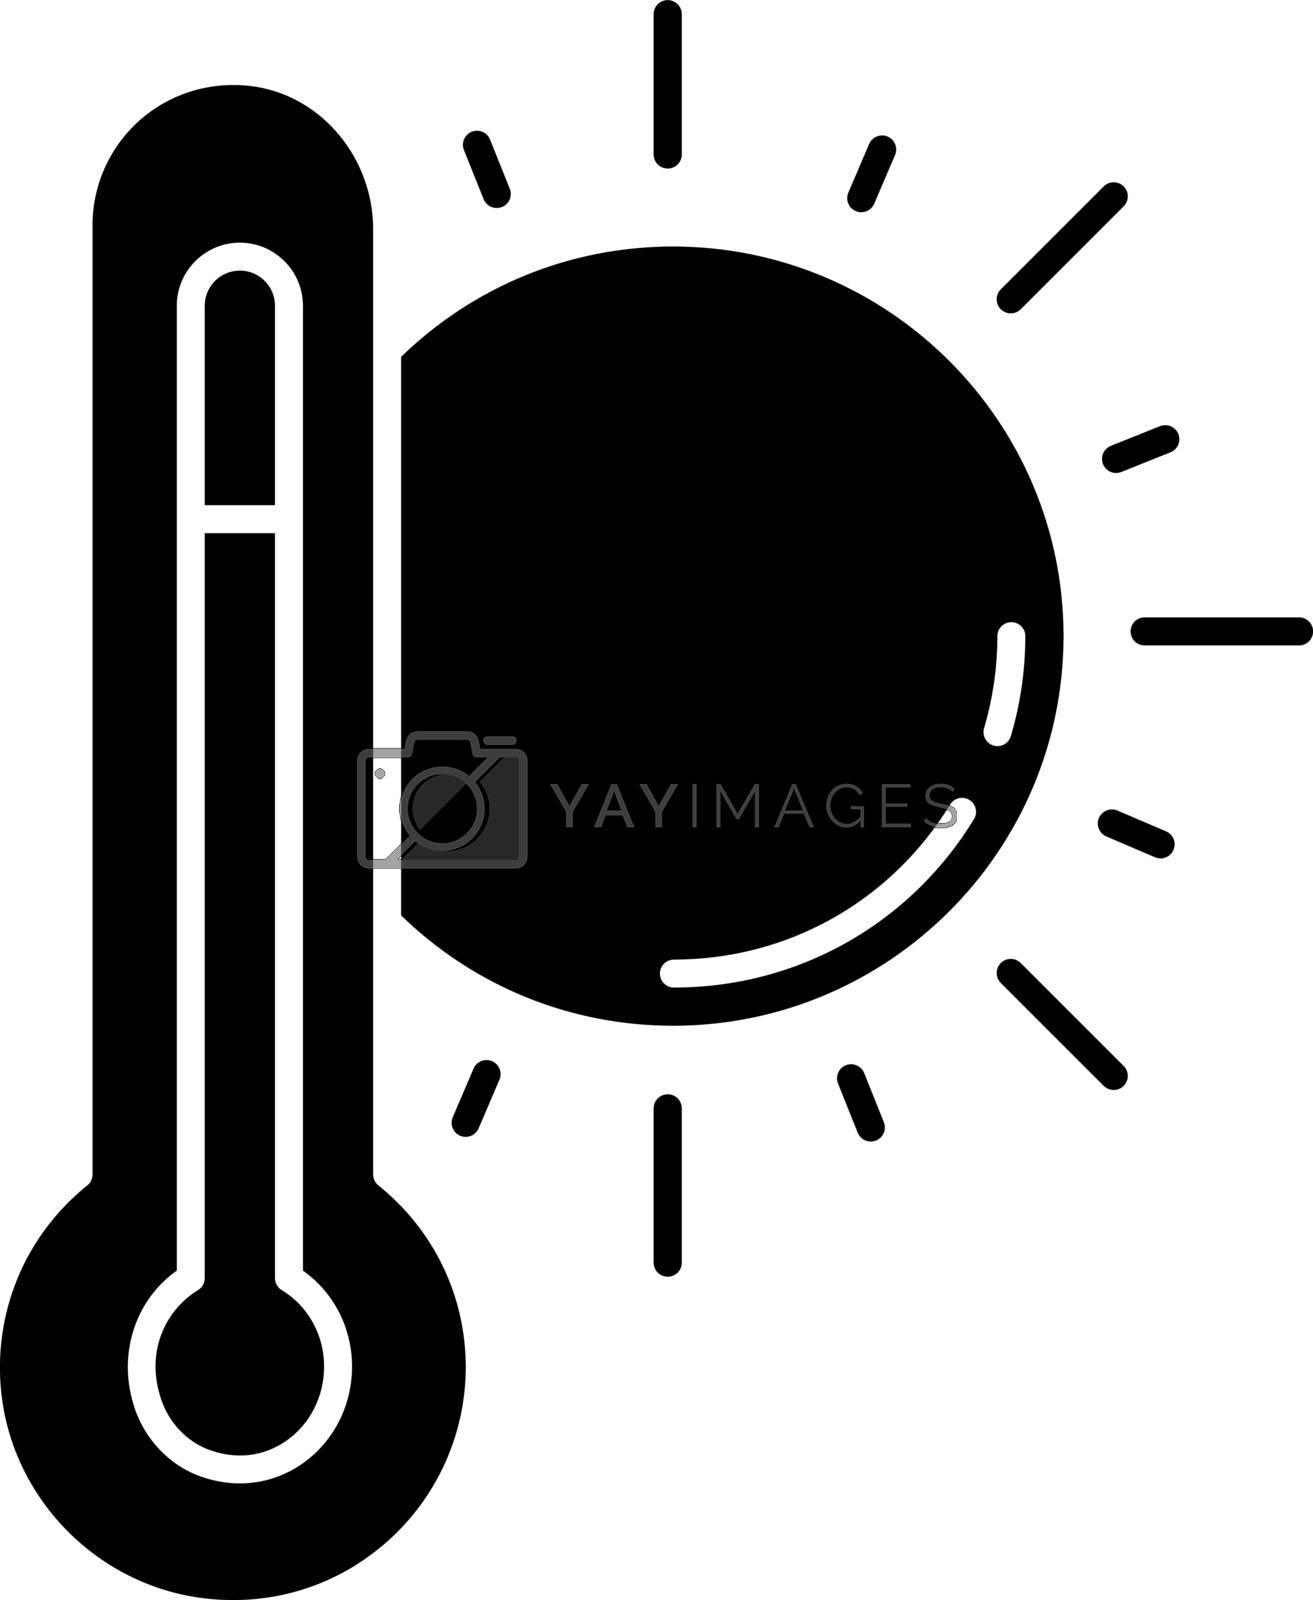 Hot weather black glyph icon. Summer heat, seasonal forecasting, meteorology science silhouette symbol on white space. Air temperature prediction. Thermometer with sun vector isolated illustration